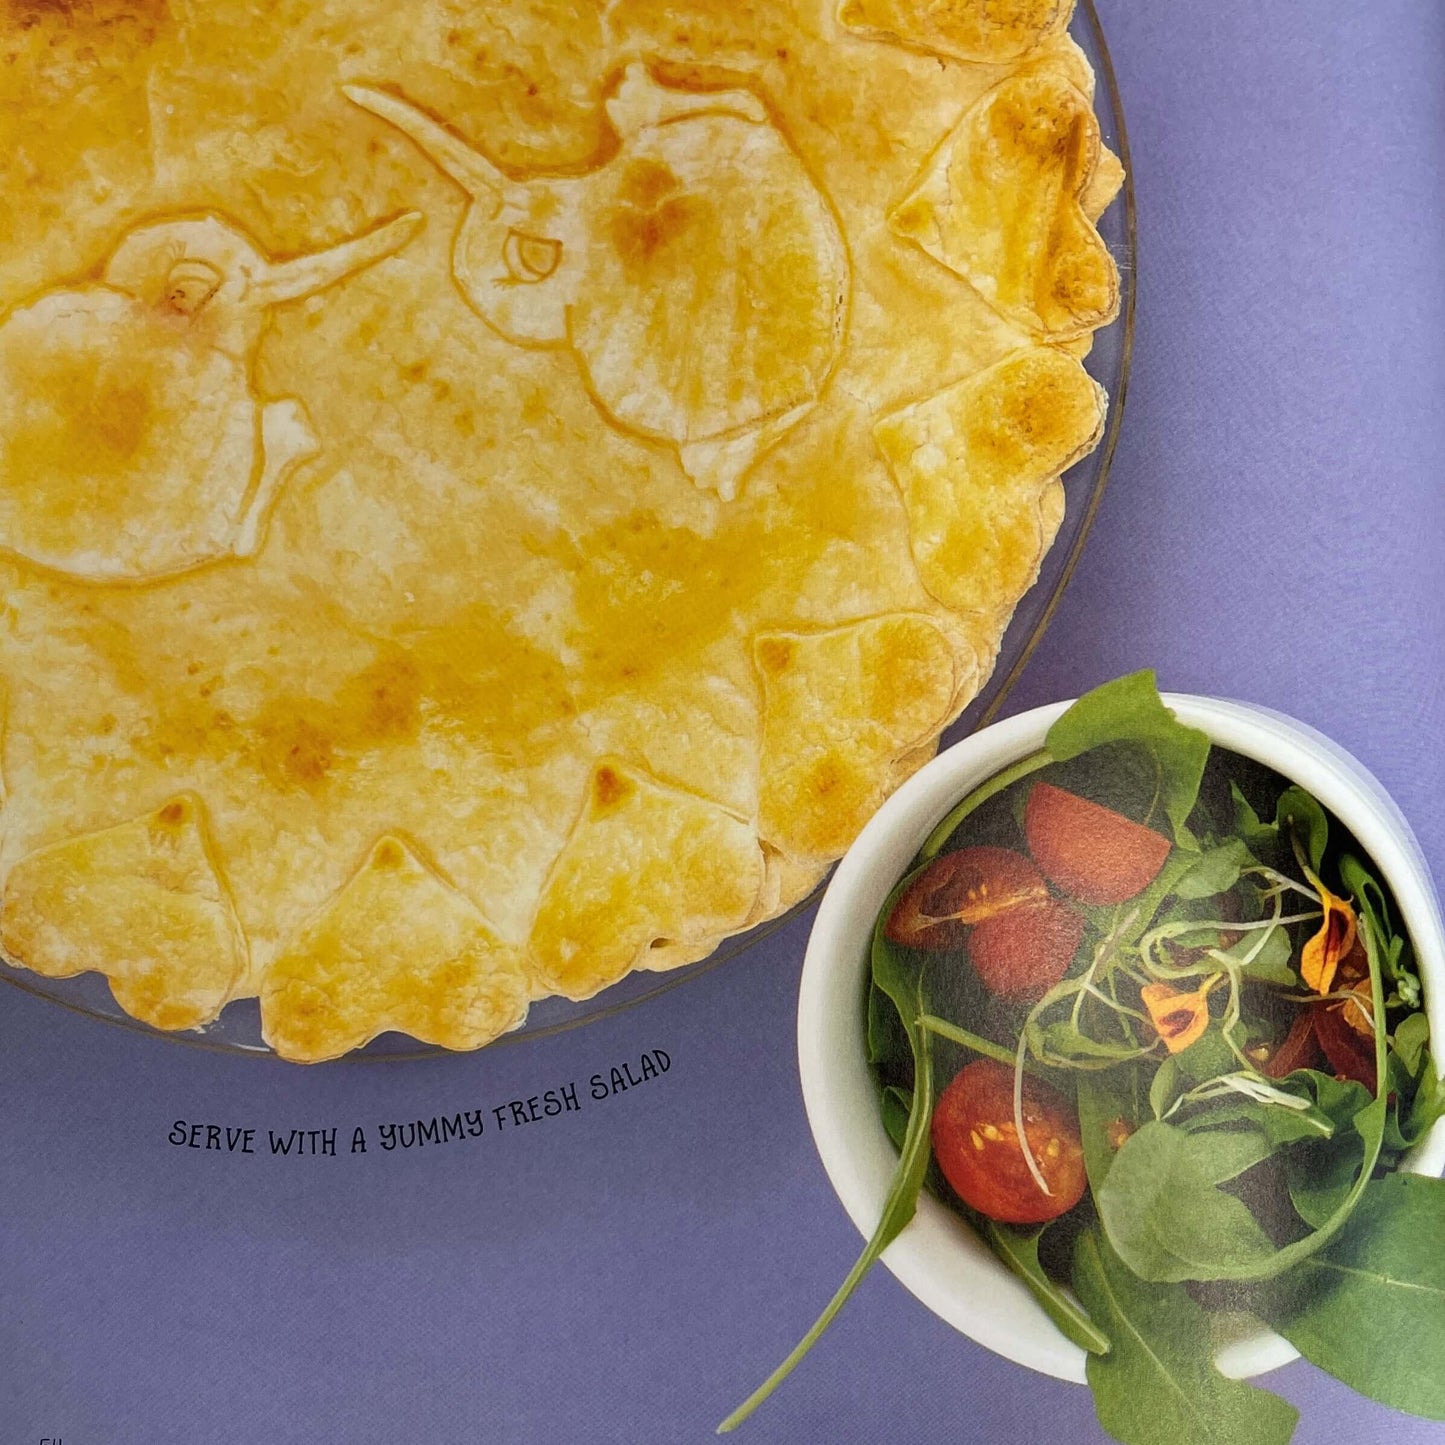 Page from childrens cookbook Kuwi's Kitchen by Kat Merewether.